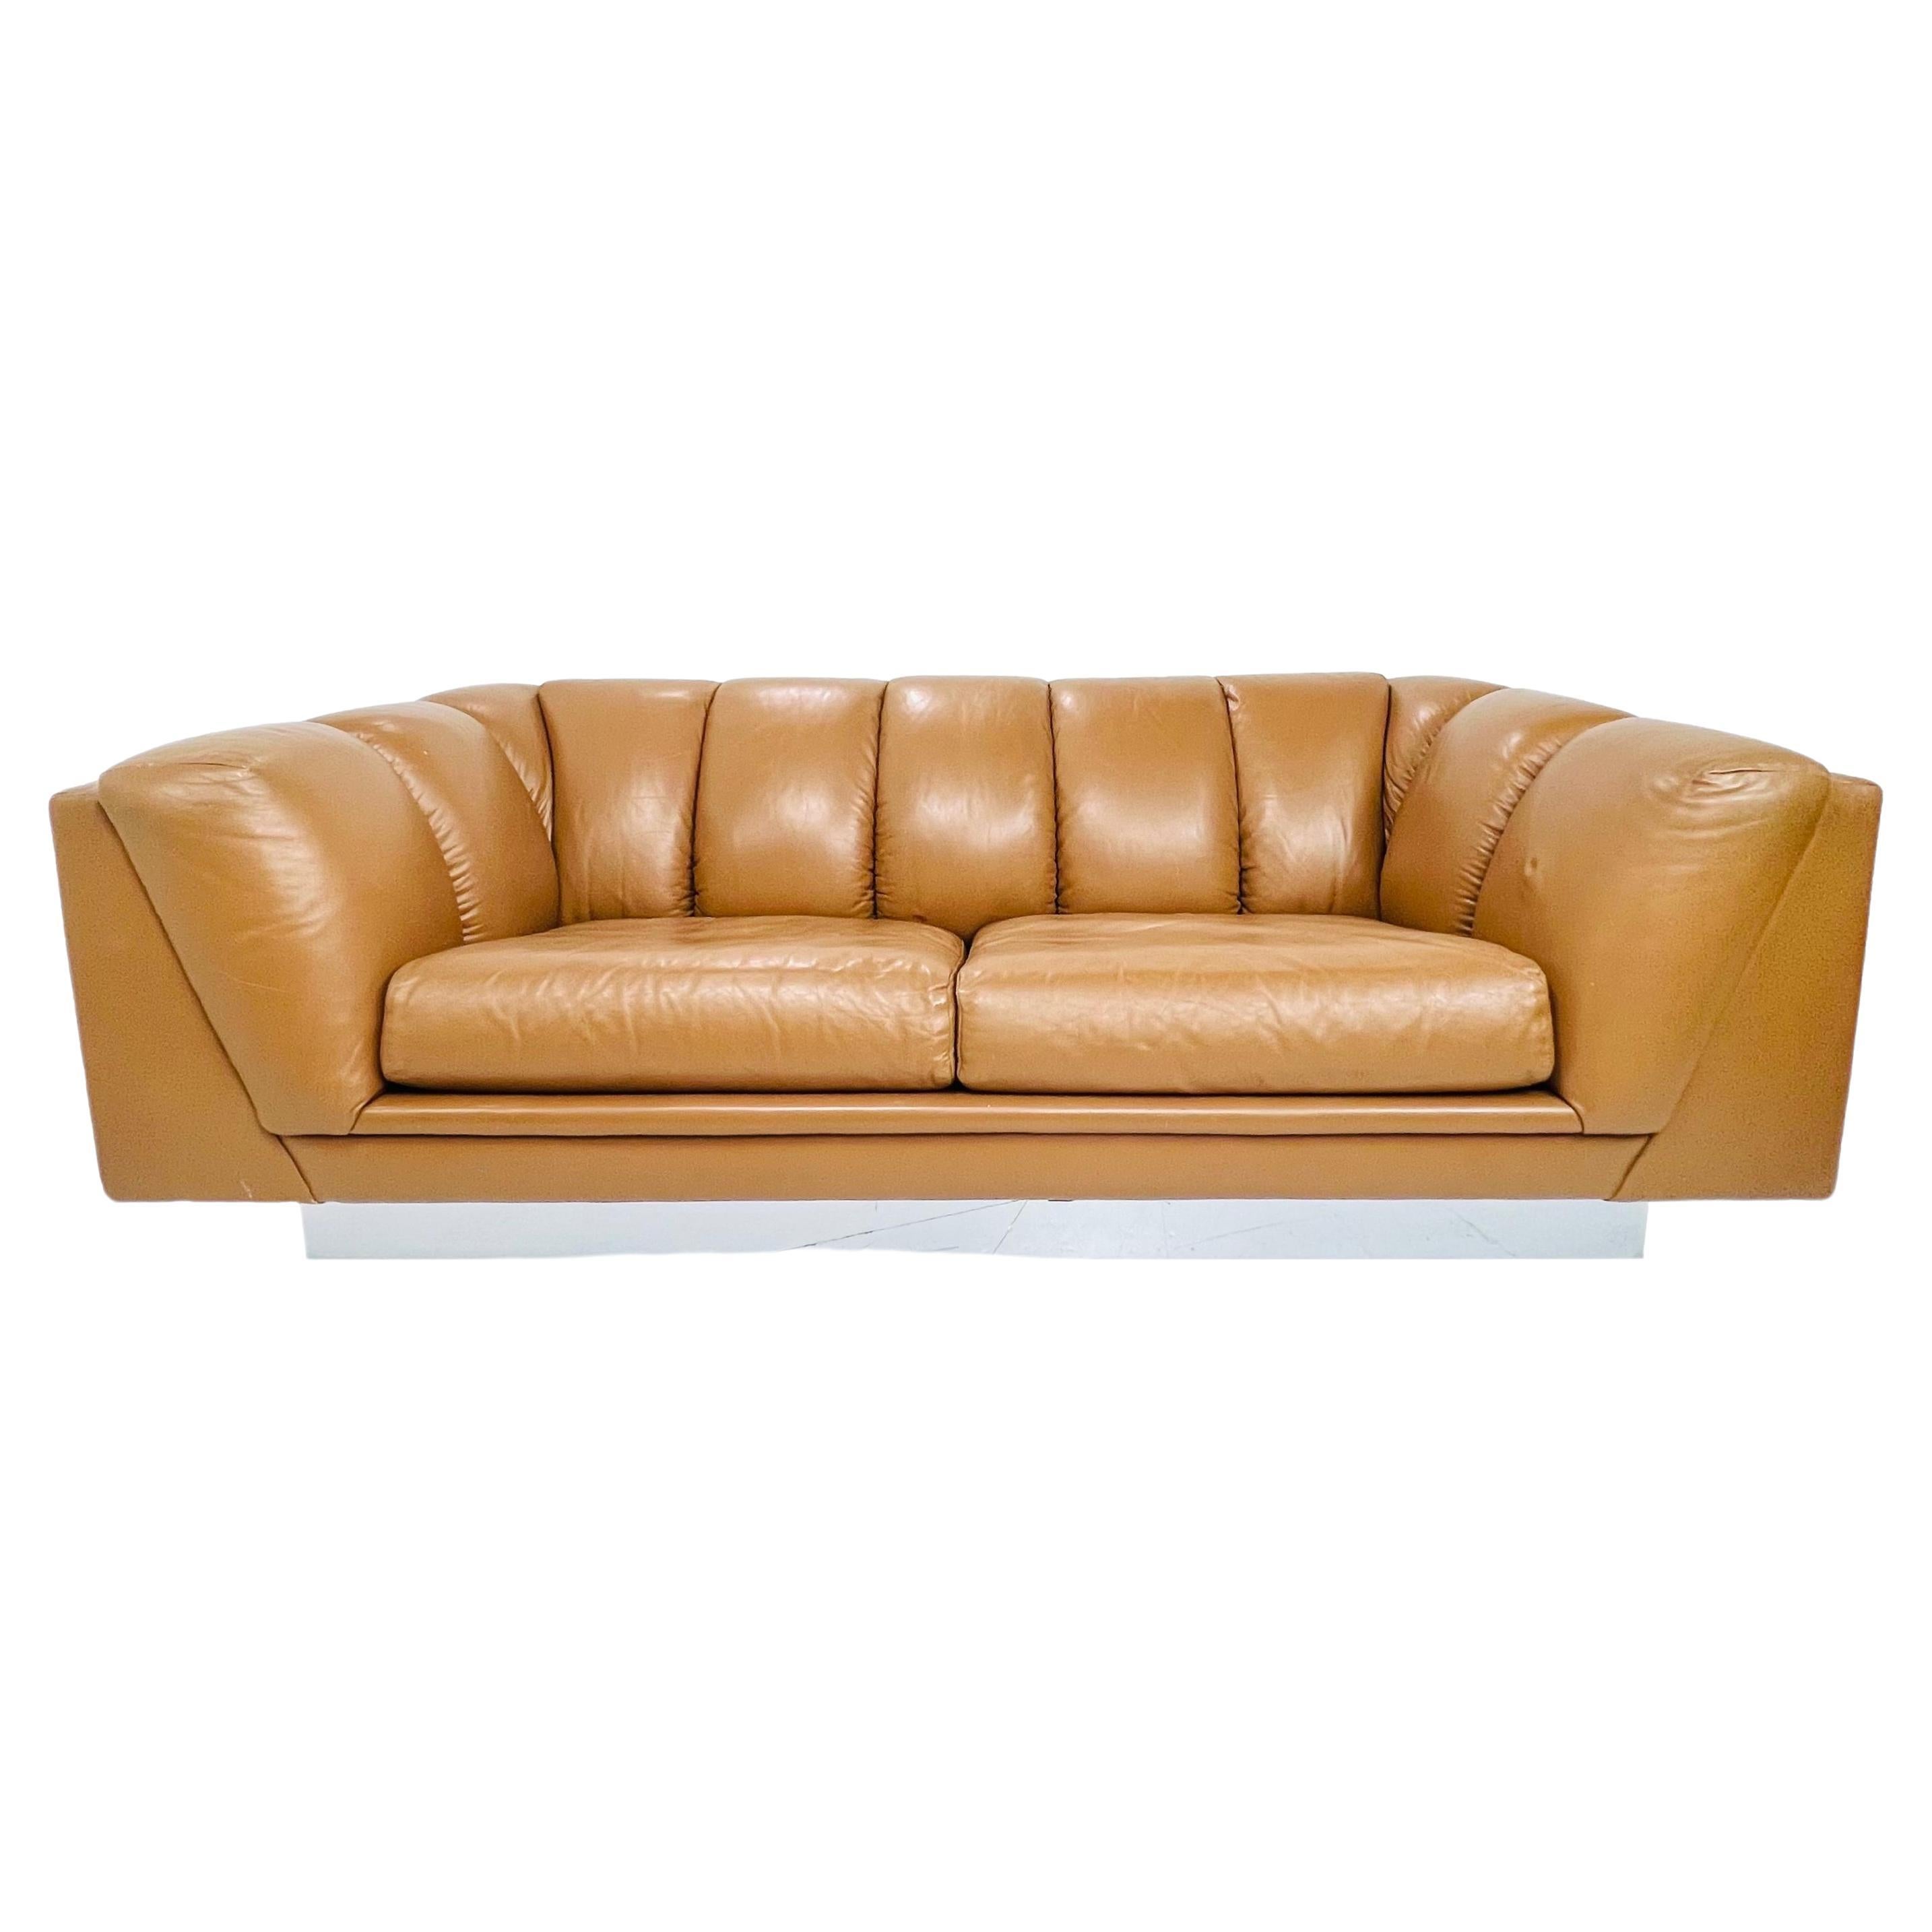 1970's Channeled Leather Sofa by Metropolitan